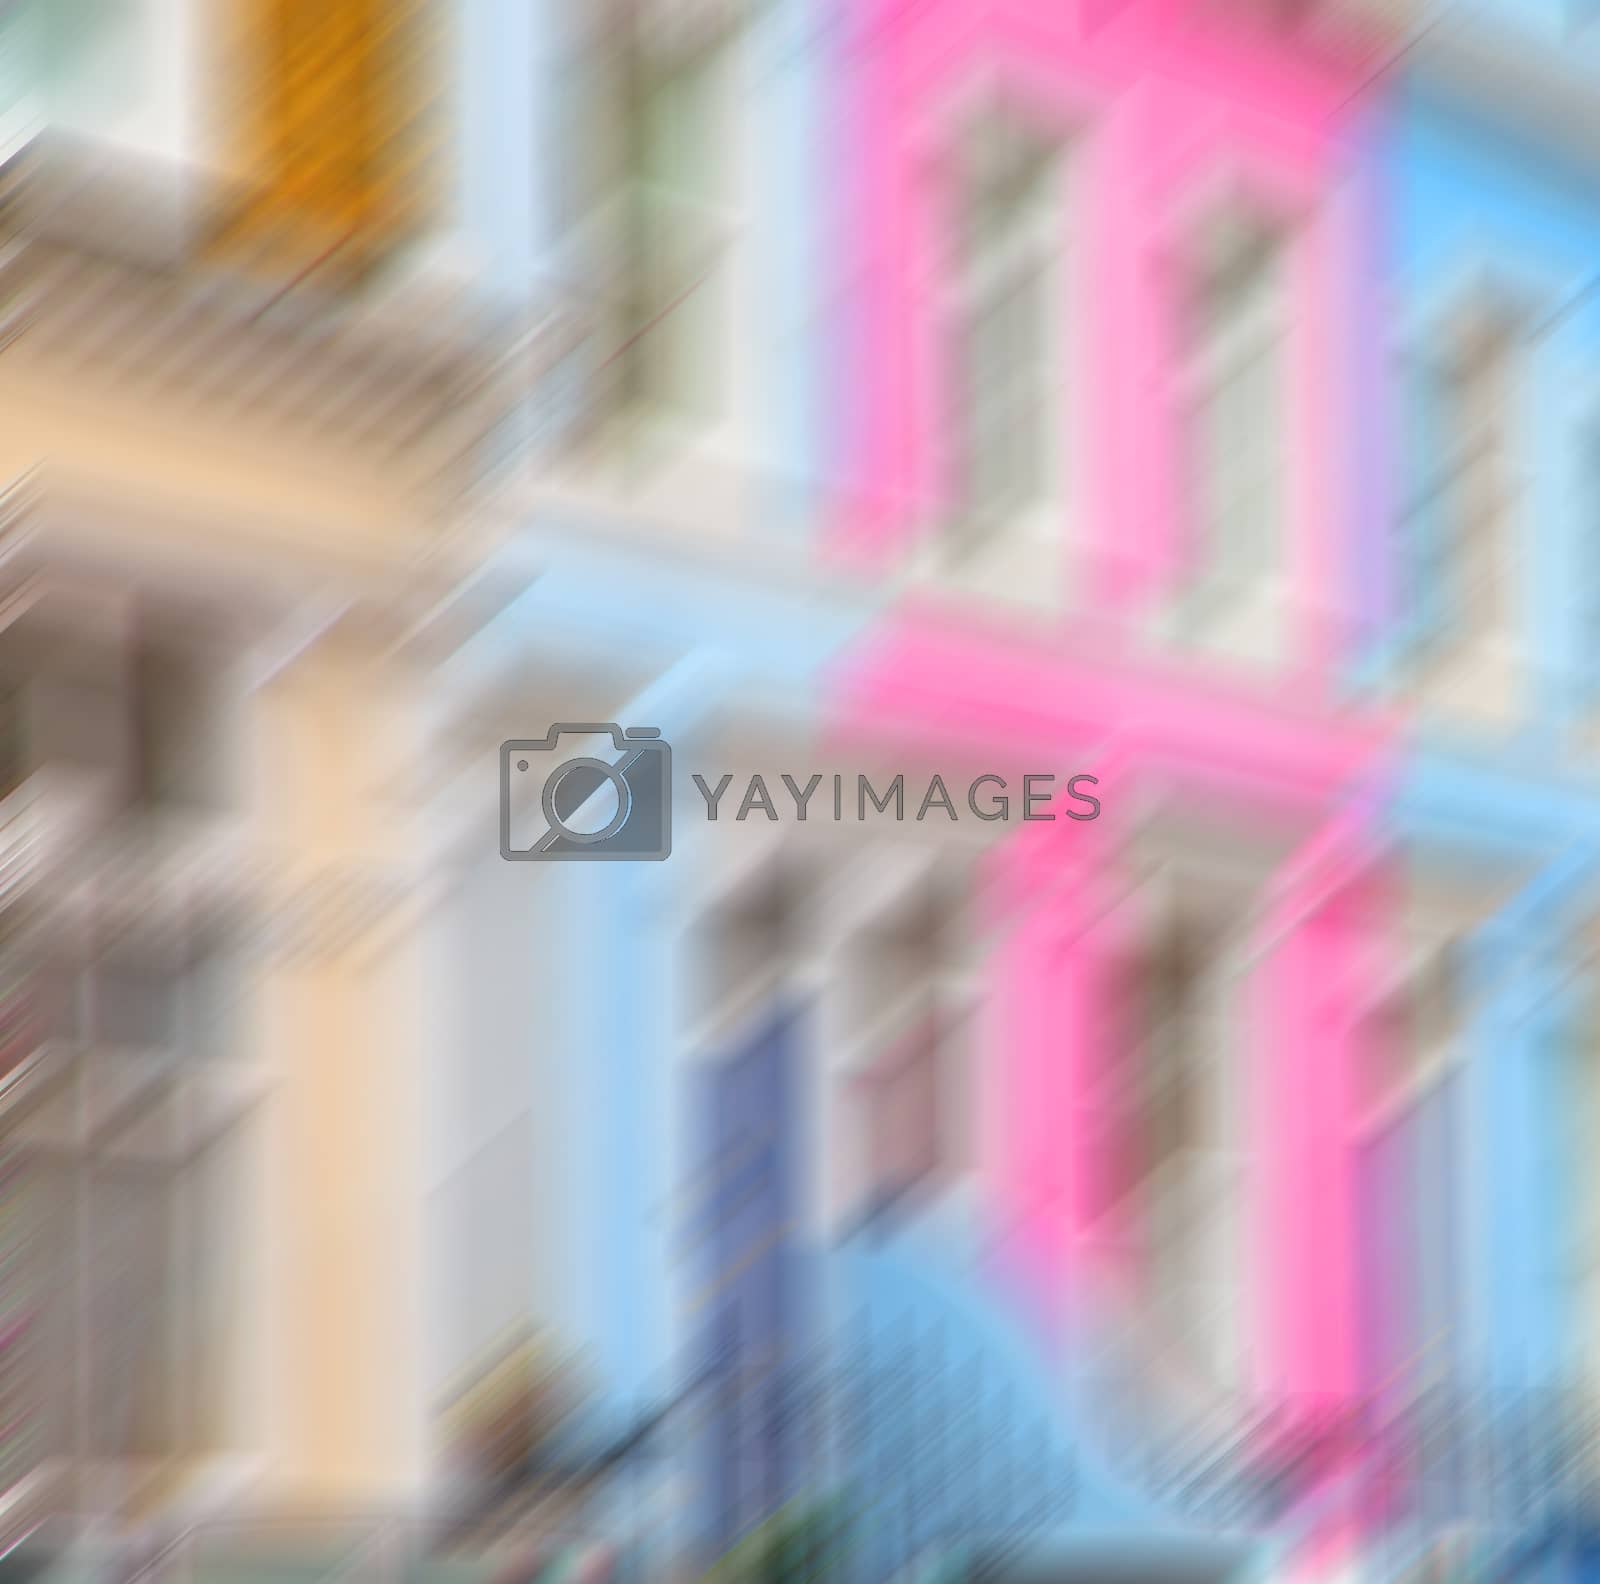 Royalty free image of notting hill  area  in london england old suburban and antique   by lkpro